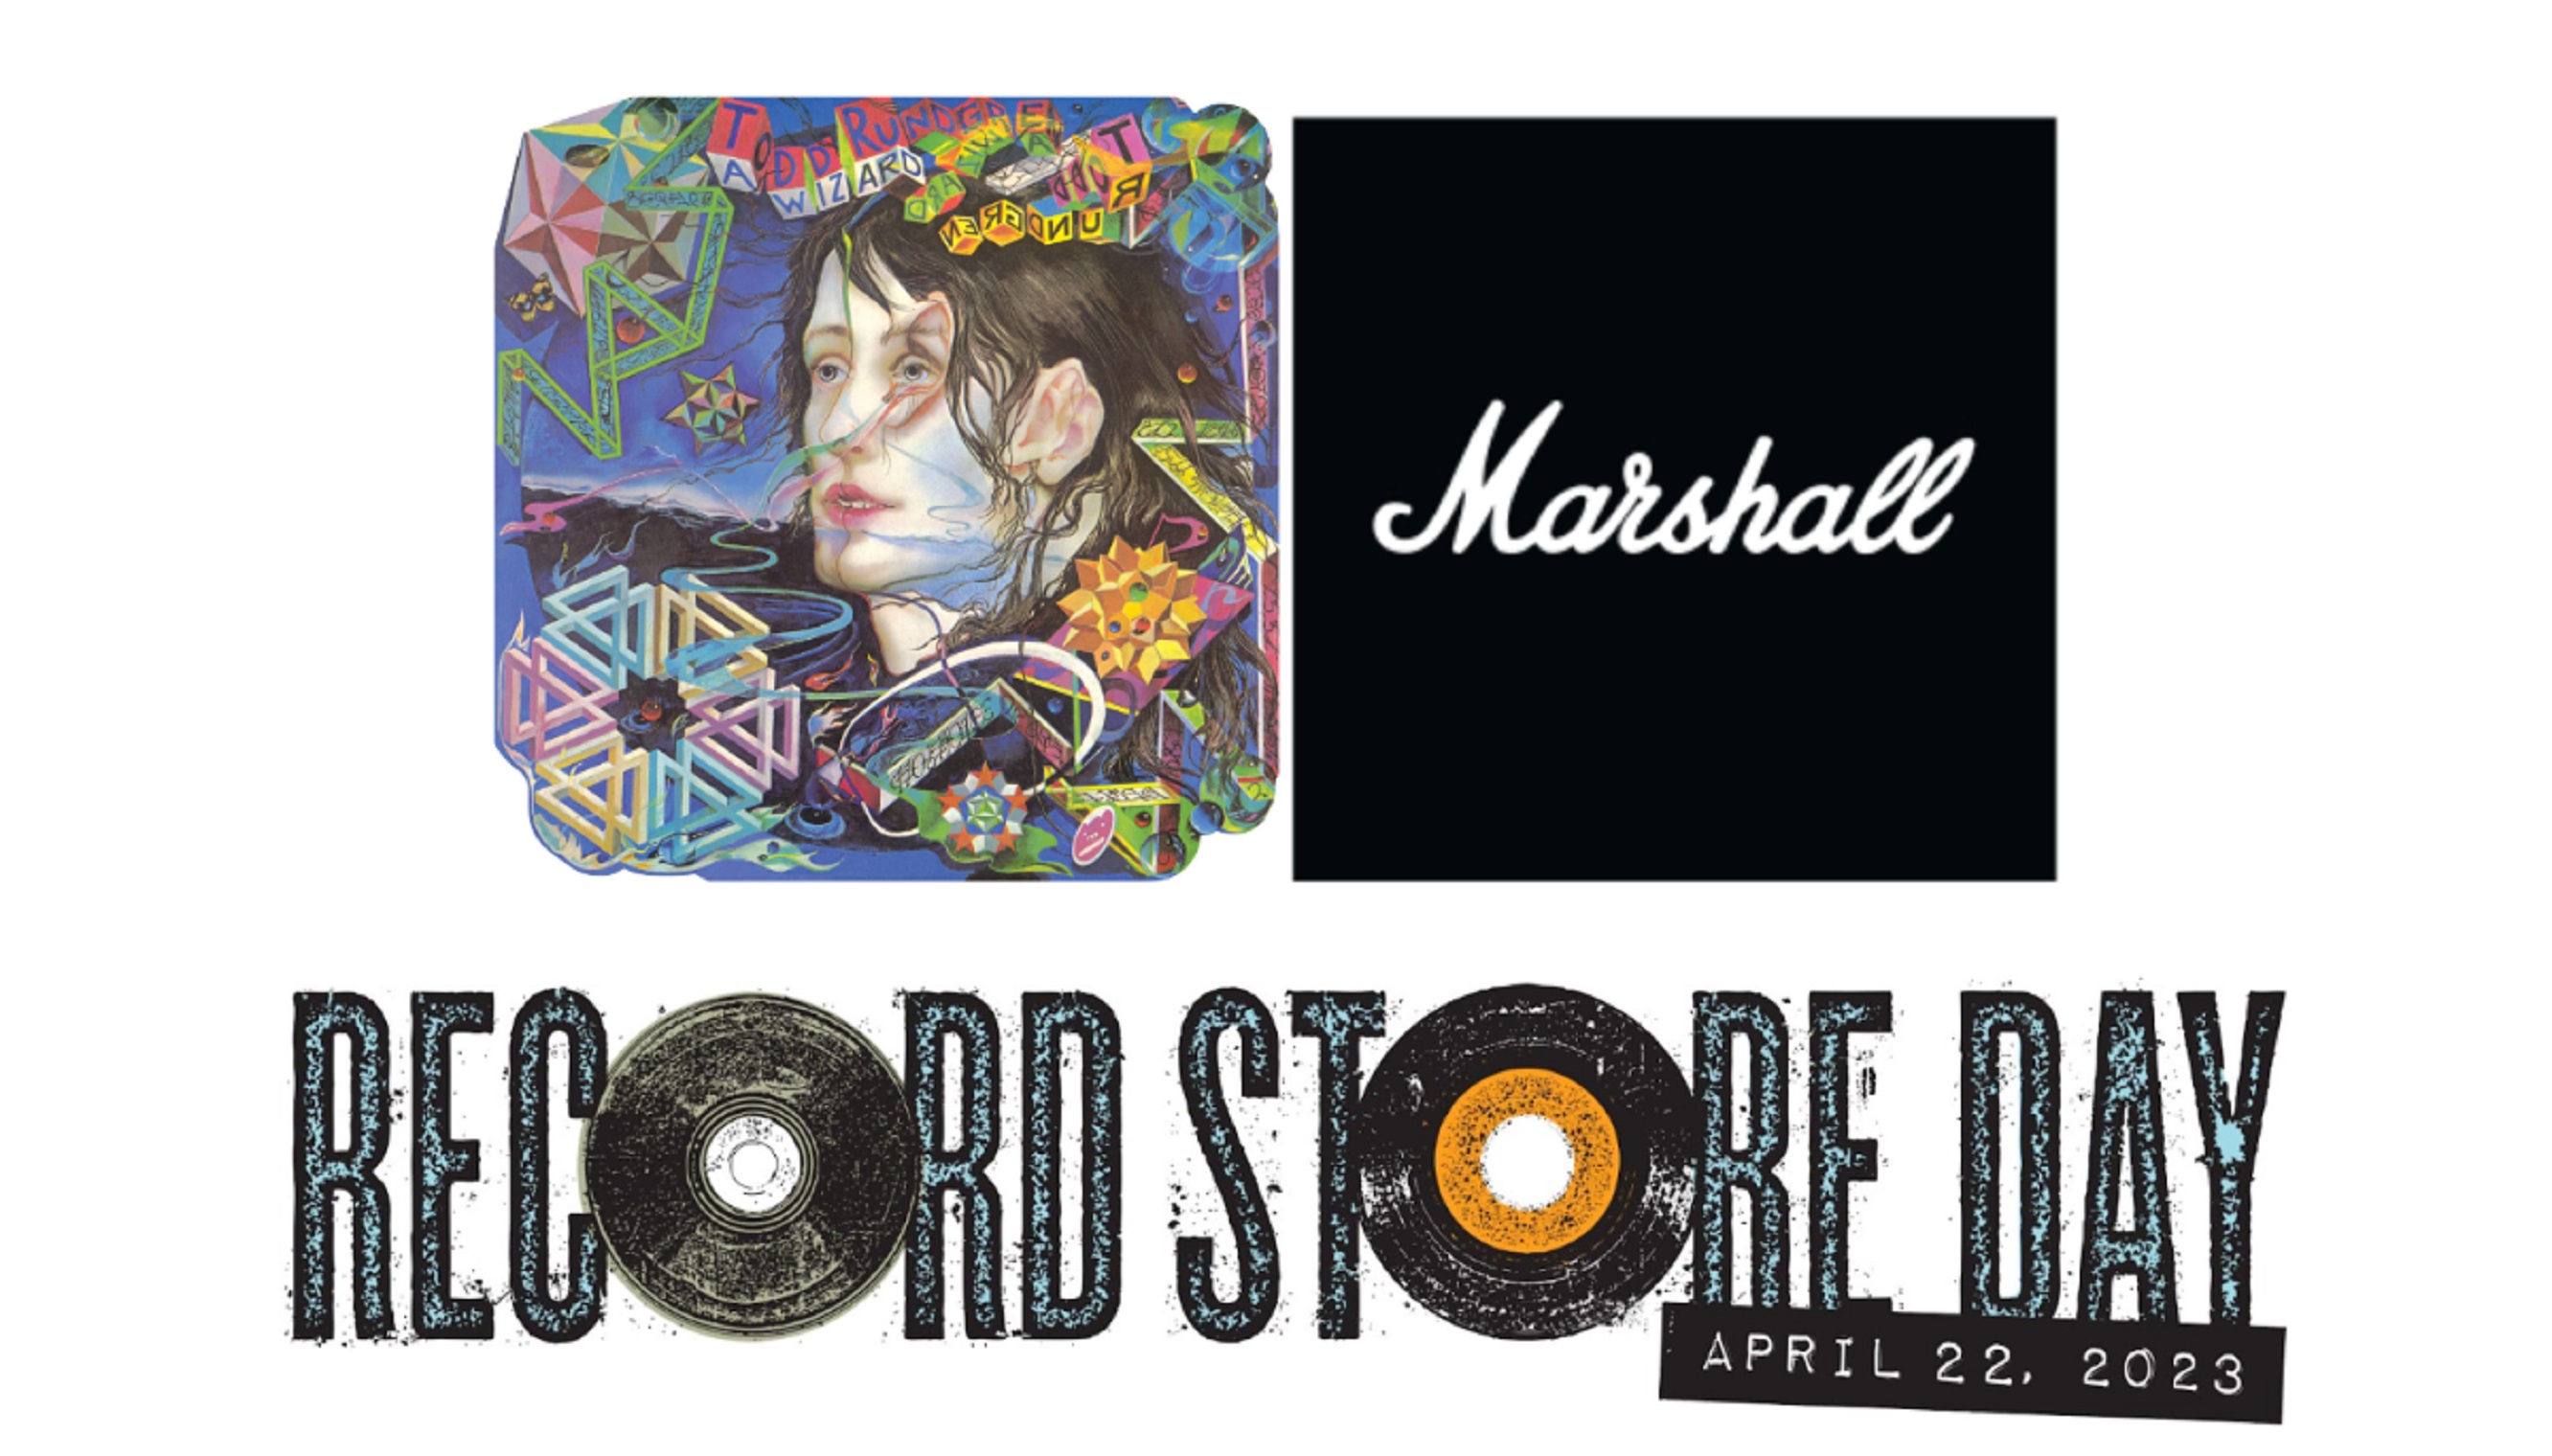 Record Store Day And Marshall Join with Todd Rundgren's Spirit Of Harmony Foundation And Celebrate The 50th Anniversary of A WIZARD, a TRUE STAR